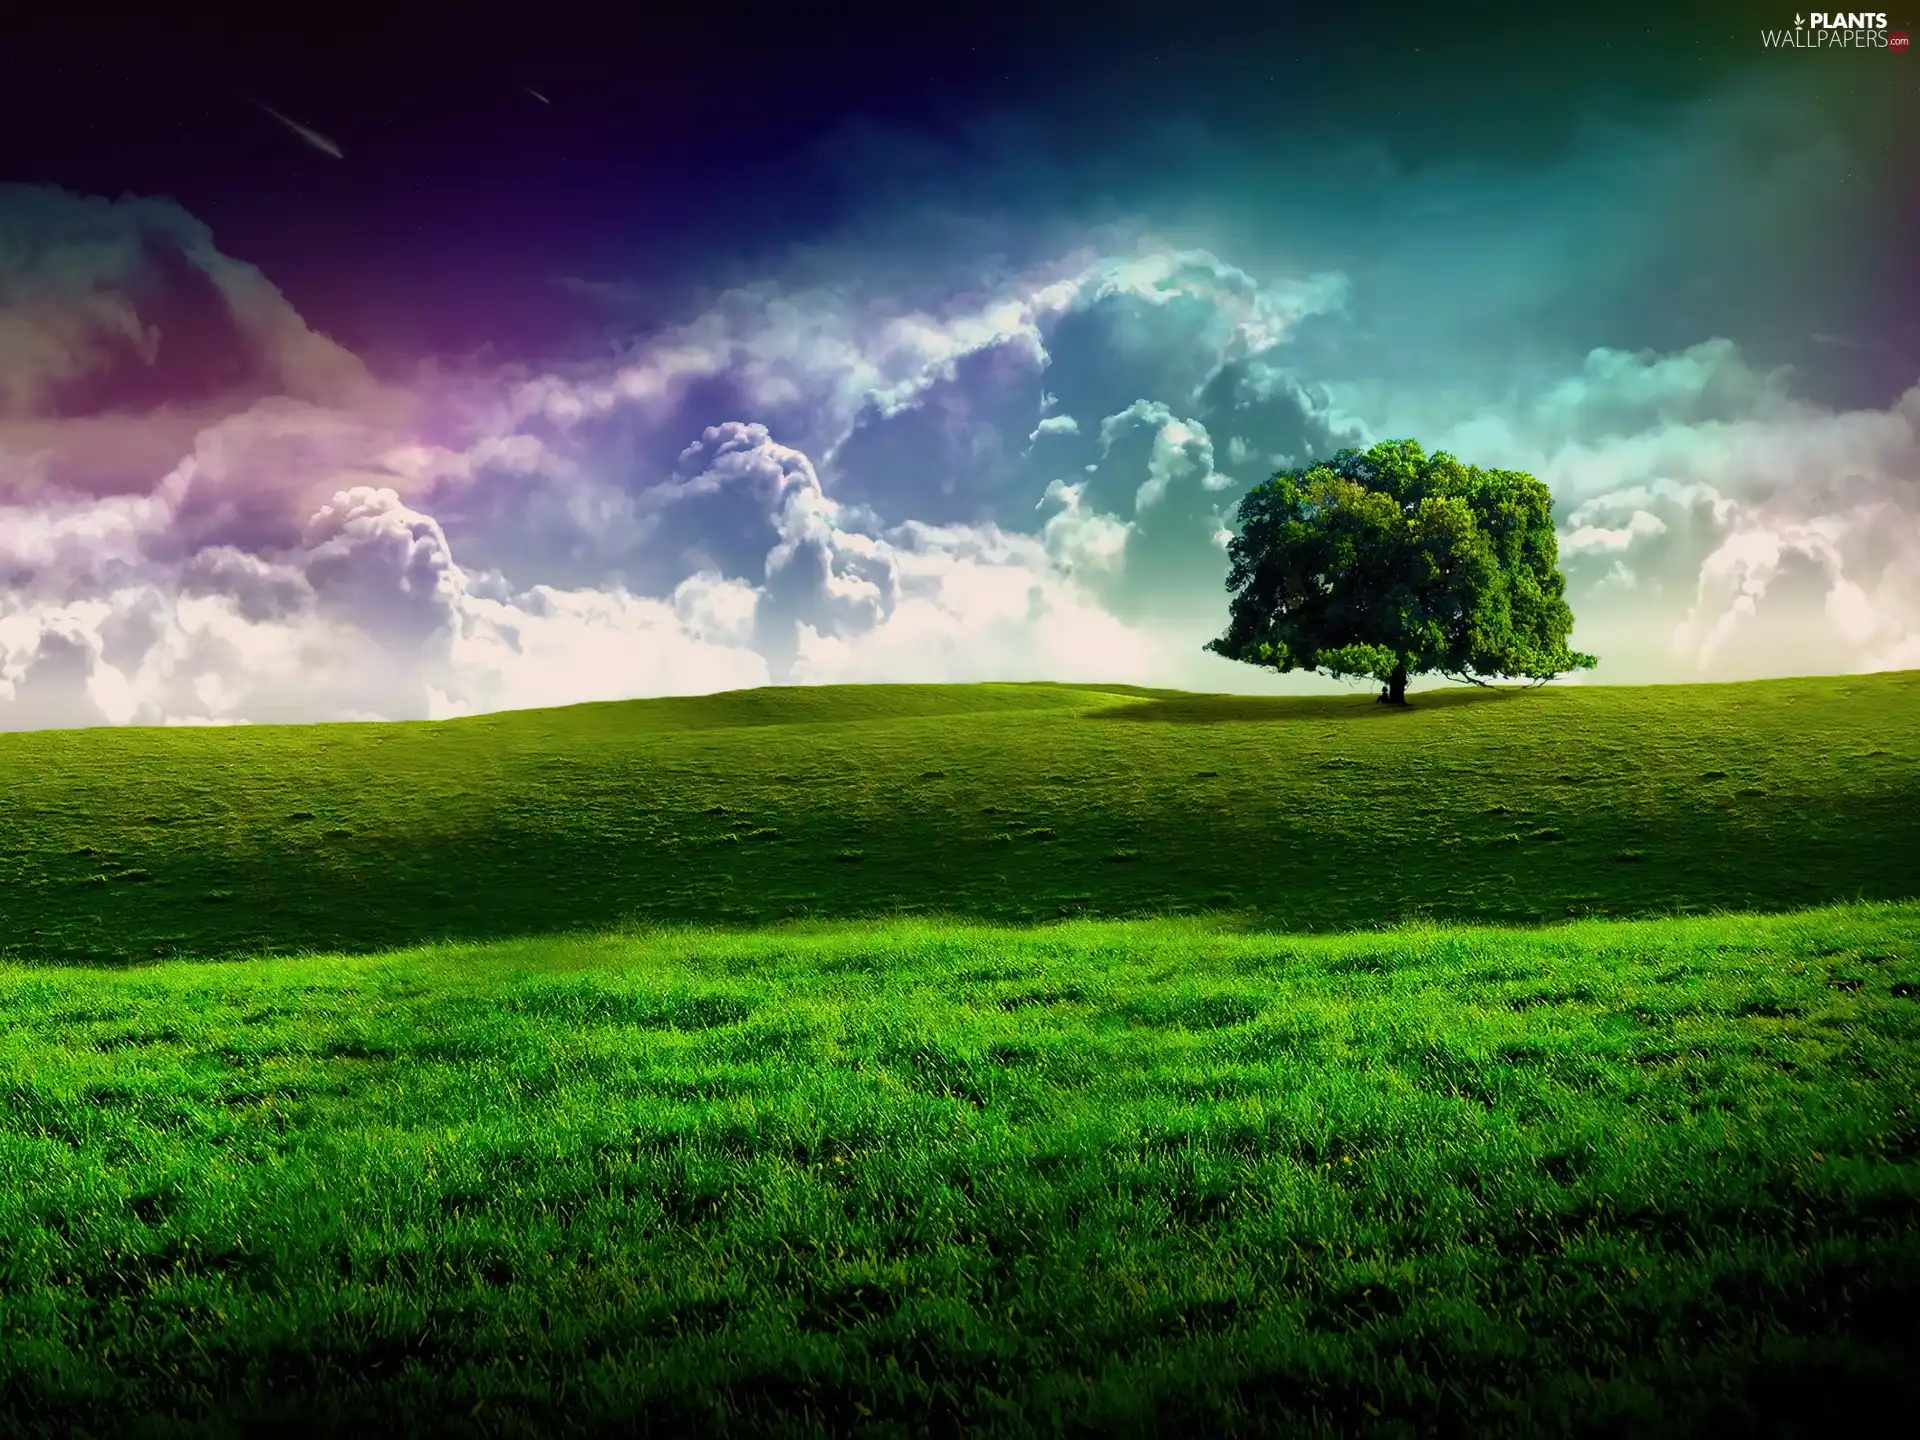 Meadow, grass, lonely, trees, clouds